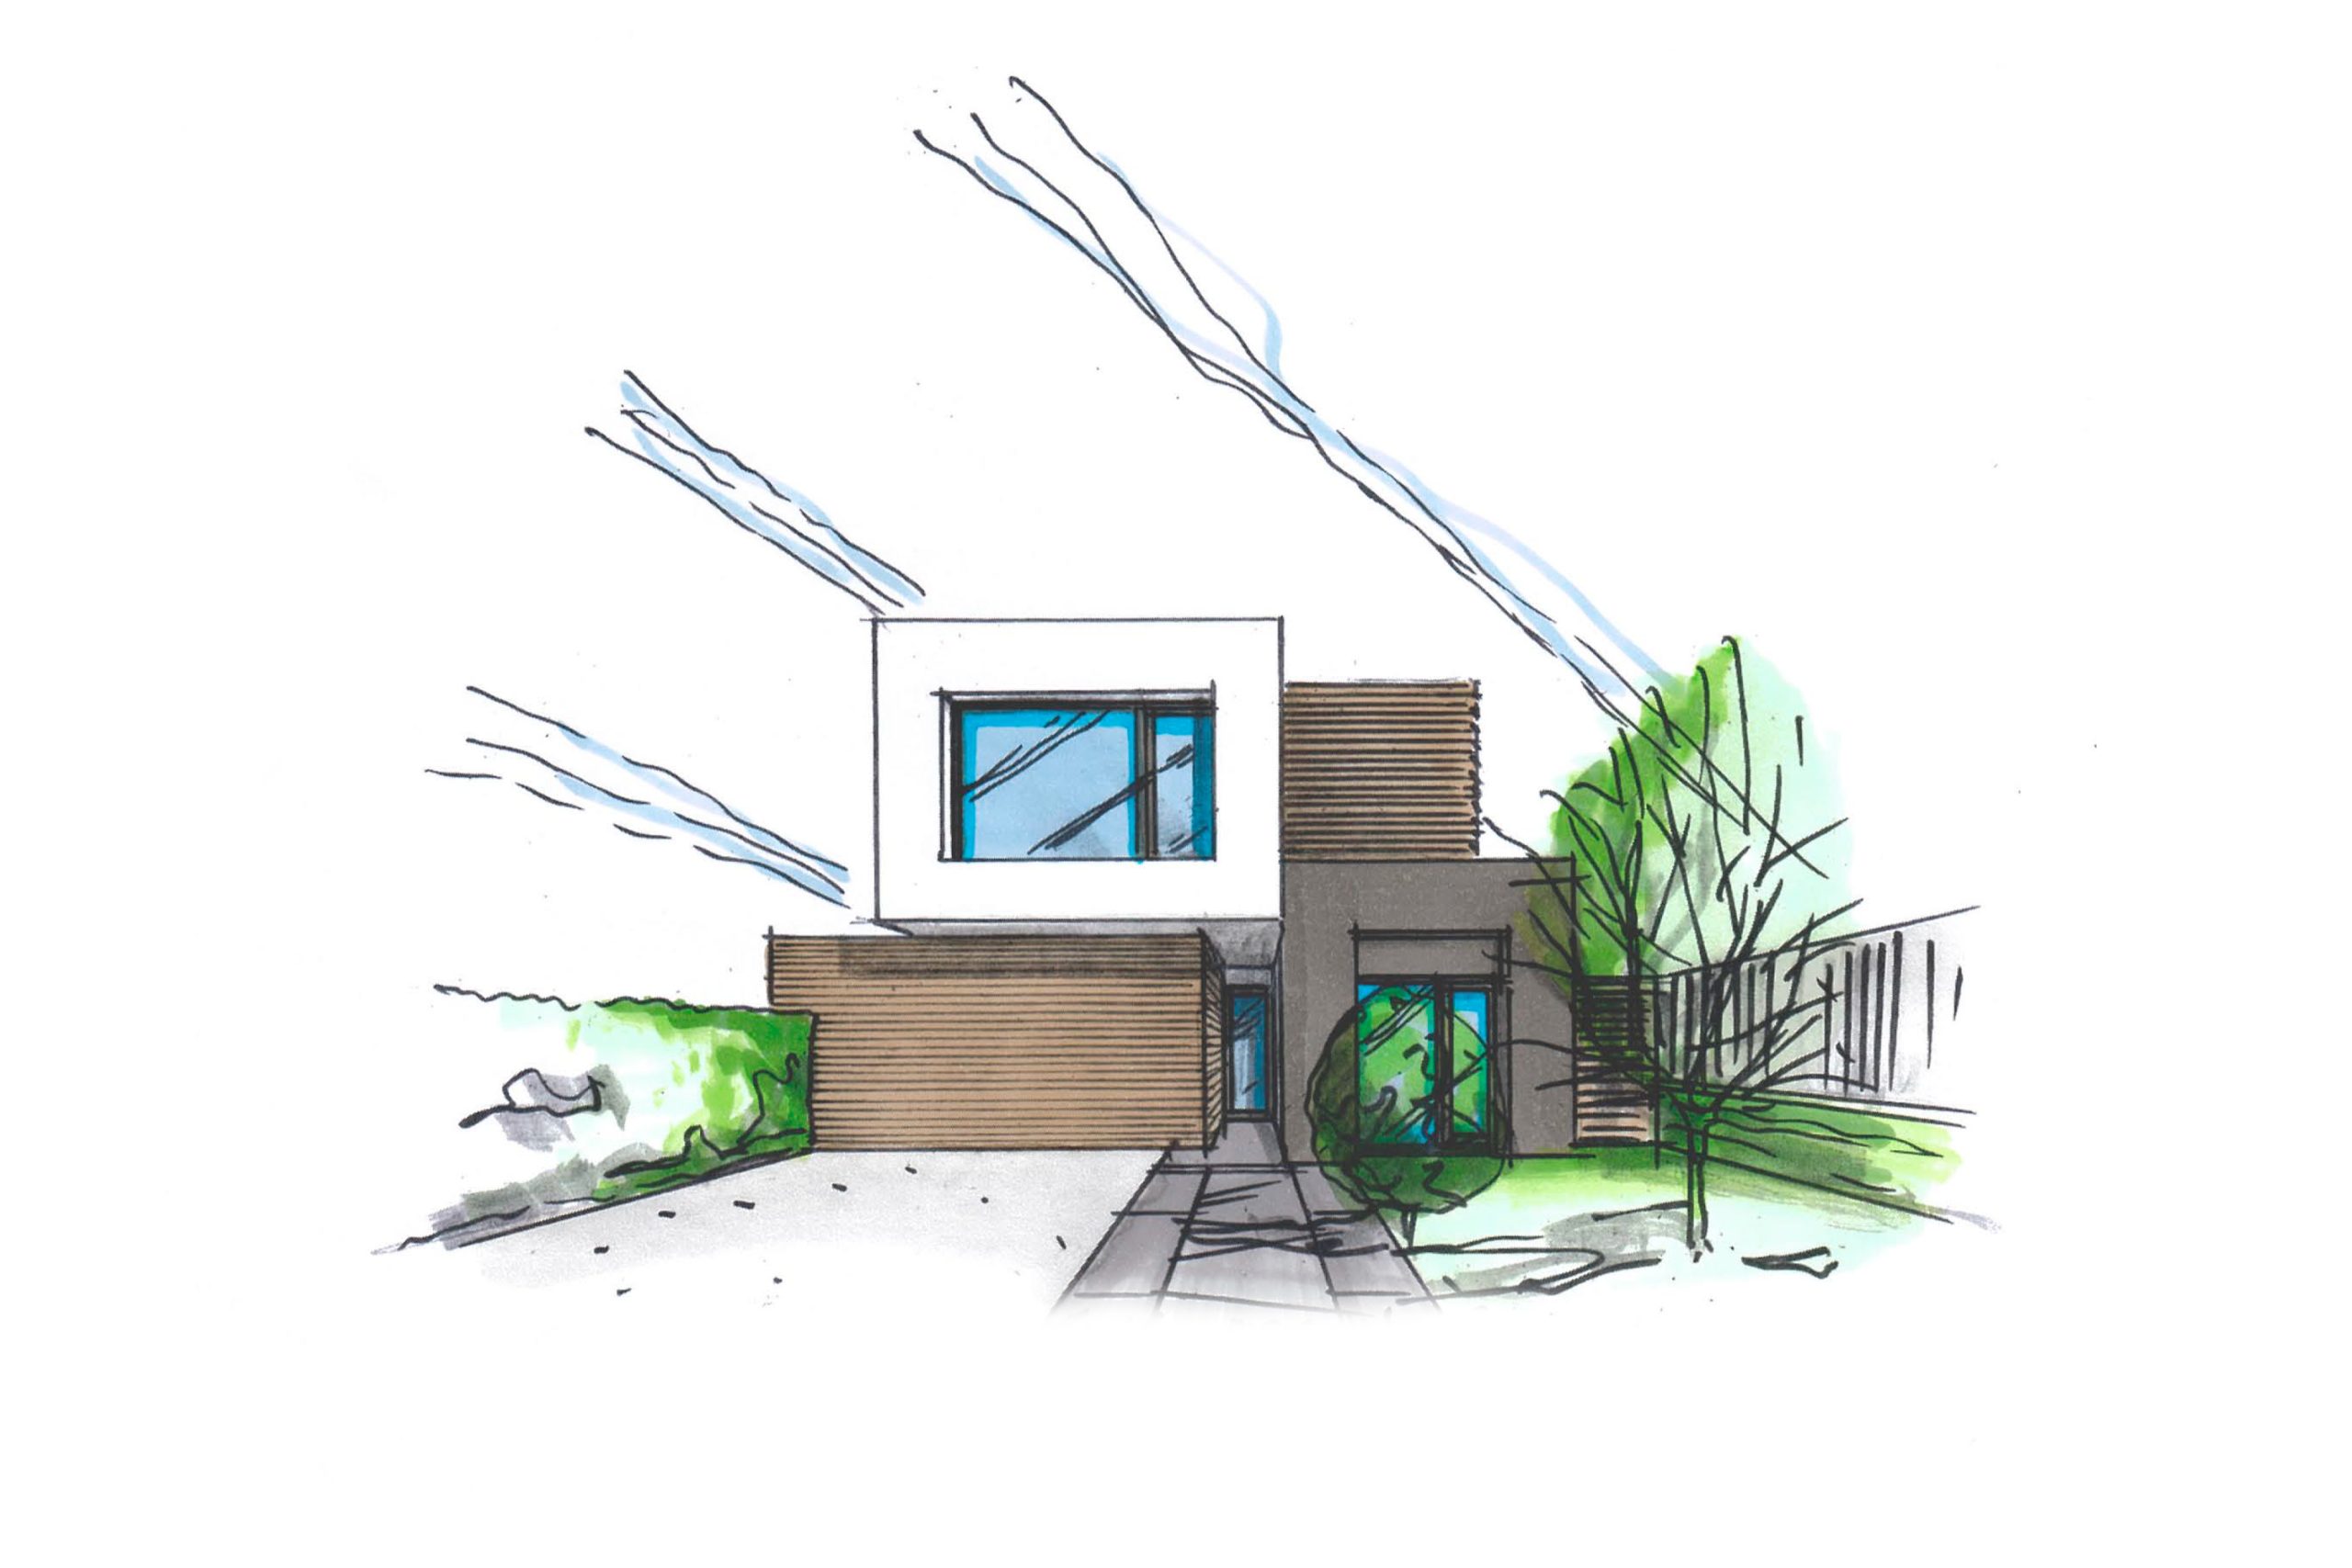 Architectural sketch of the Englehart Merlot residence.